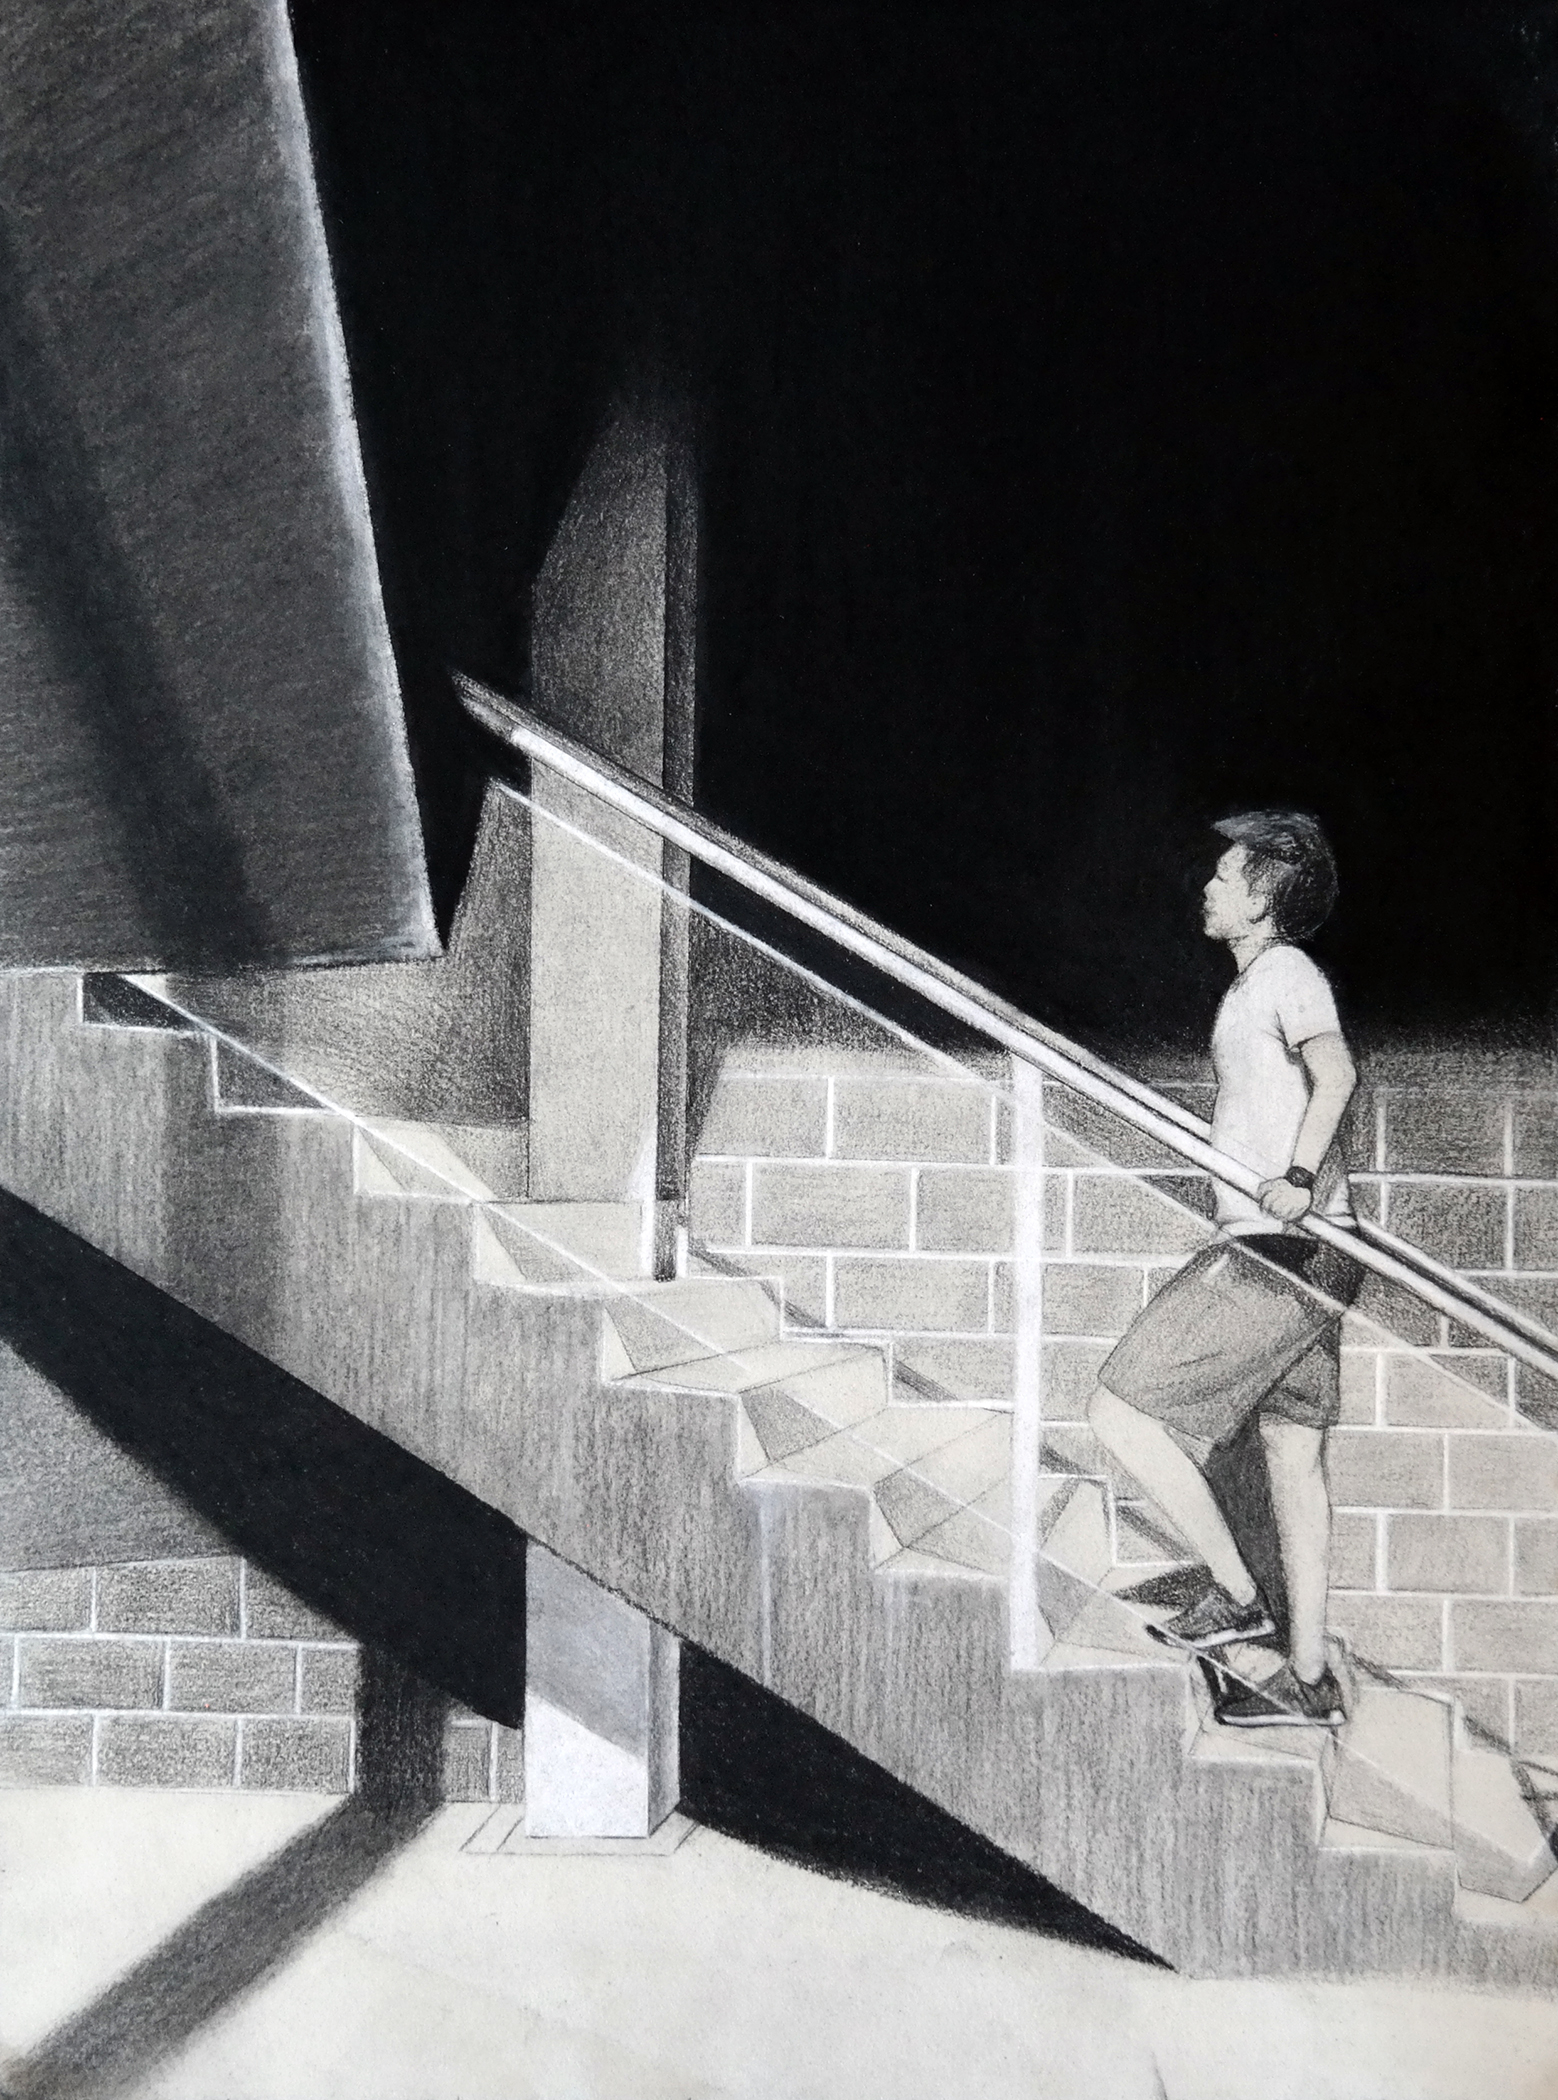 Jessica Li received a Gold Key scholastic award for her drawing, "Up."